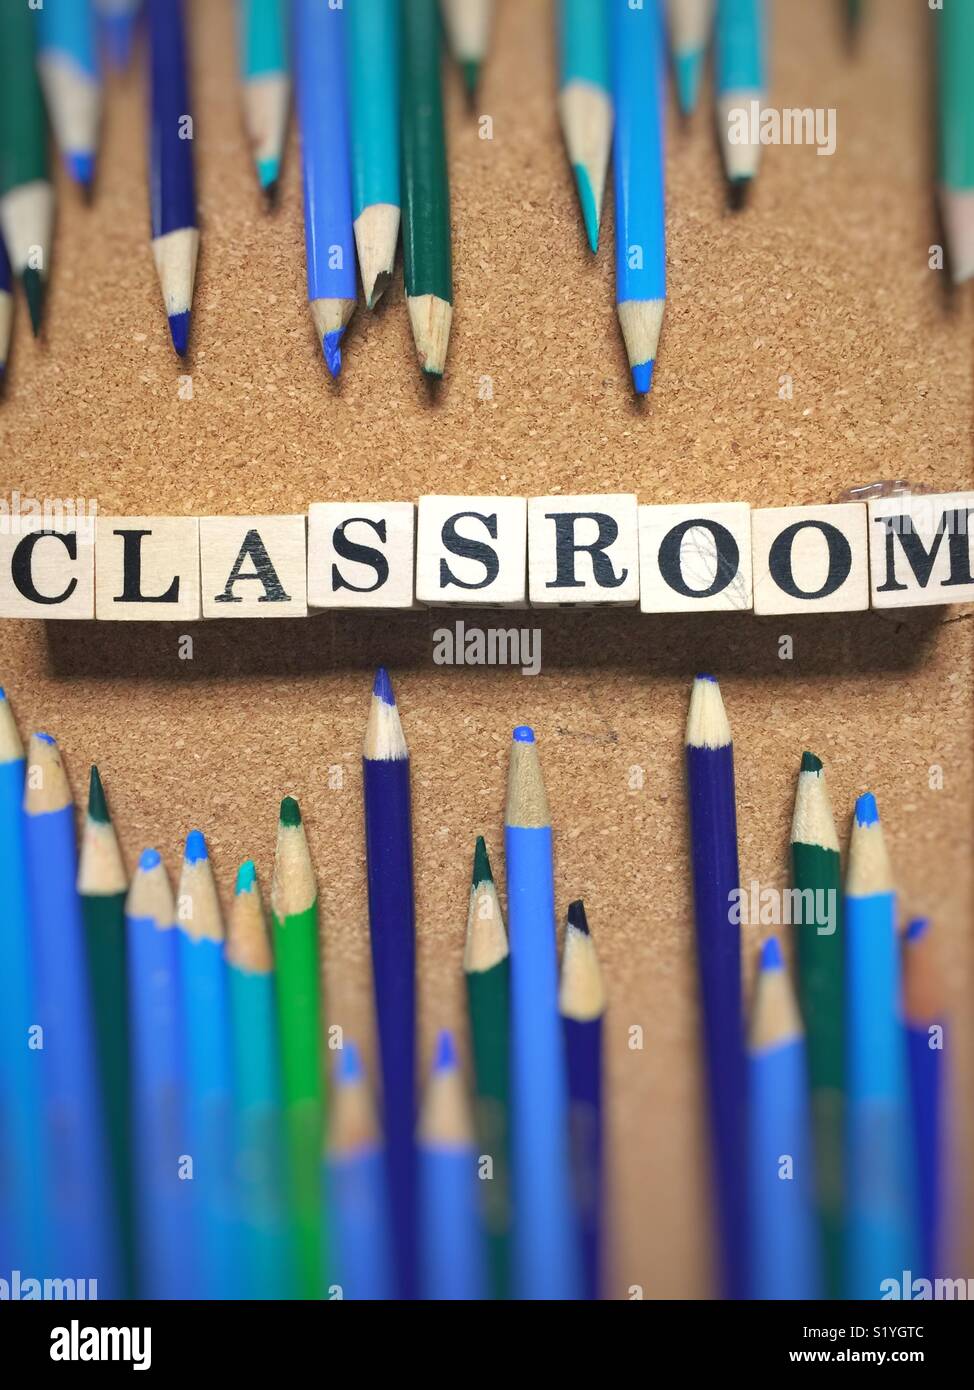 Word Classroom made with blocks surrounded by blue and green colored pencils on cork board Stock Photo